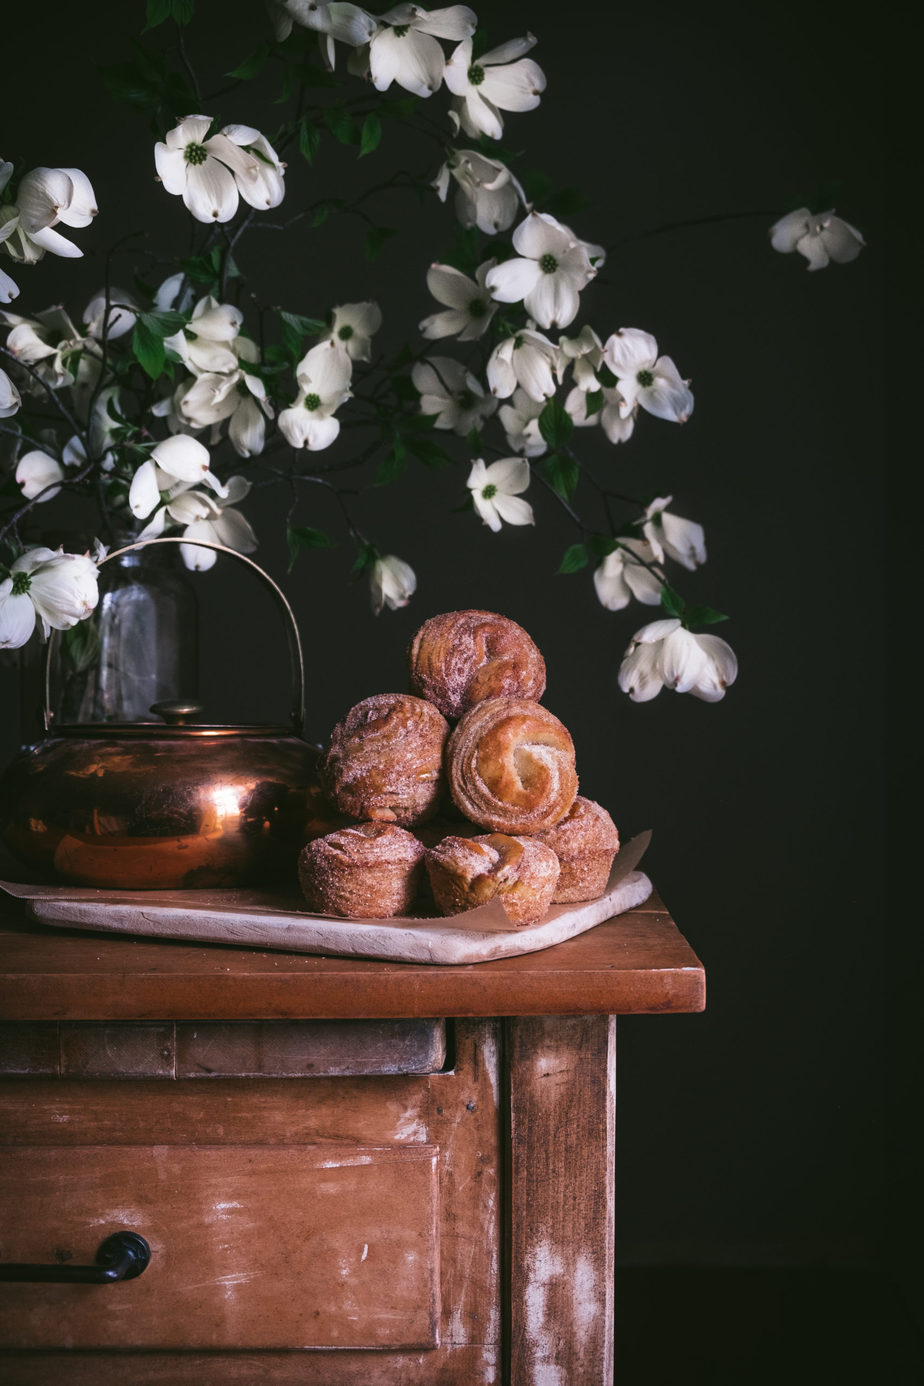 cinnamon sugar cruffins on a table next to dogwood flowers